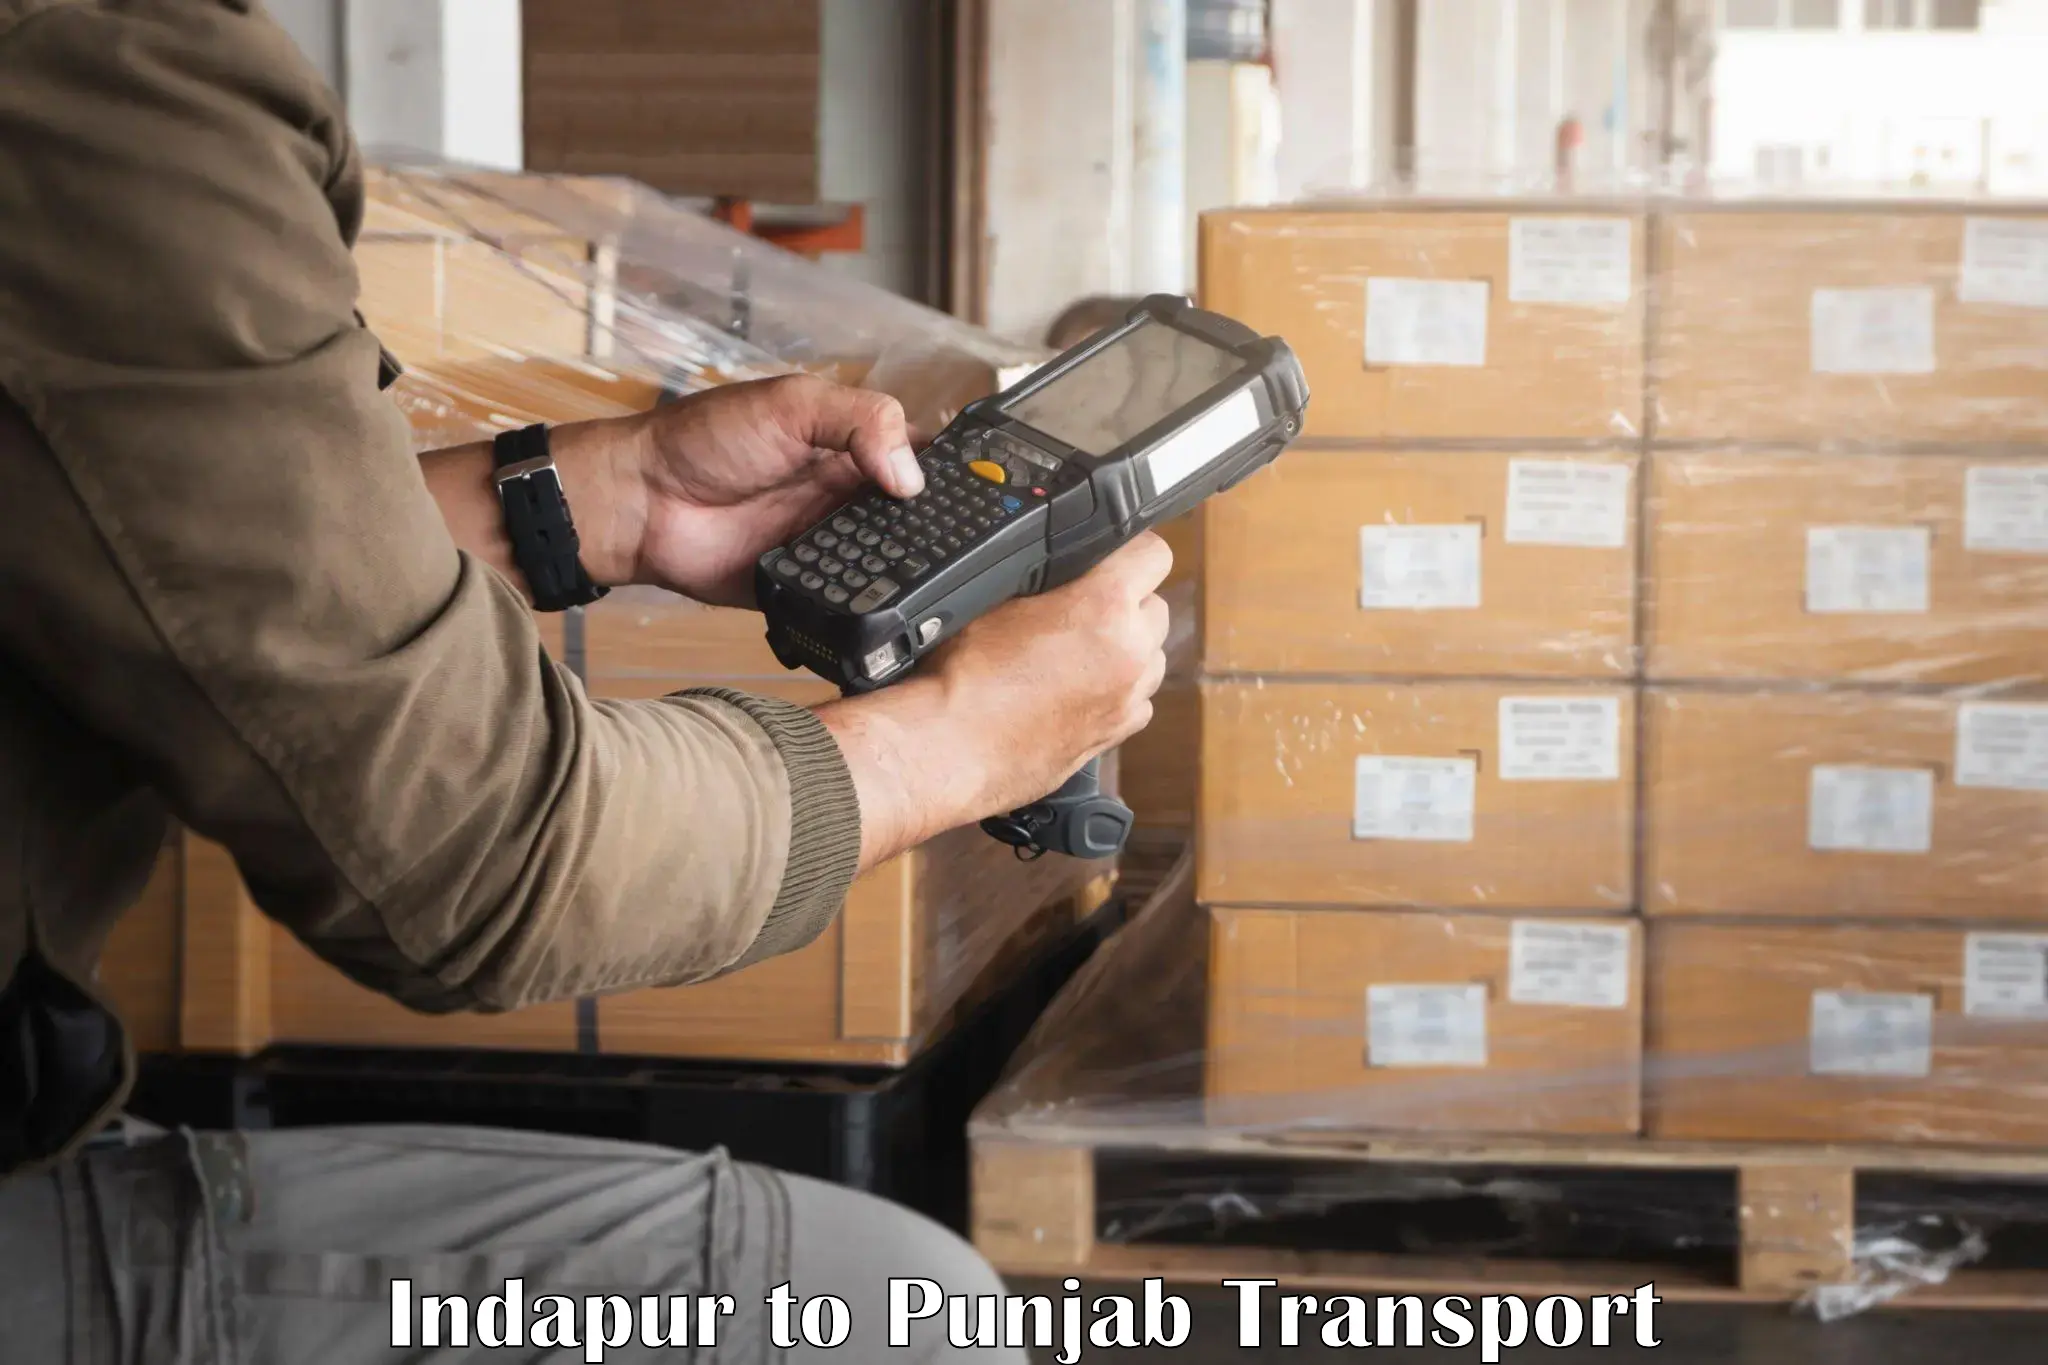 Online transport service Indapur to Patiala